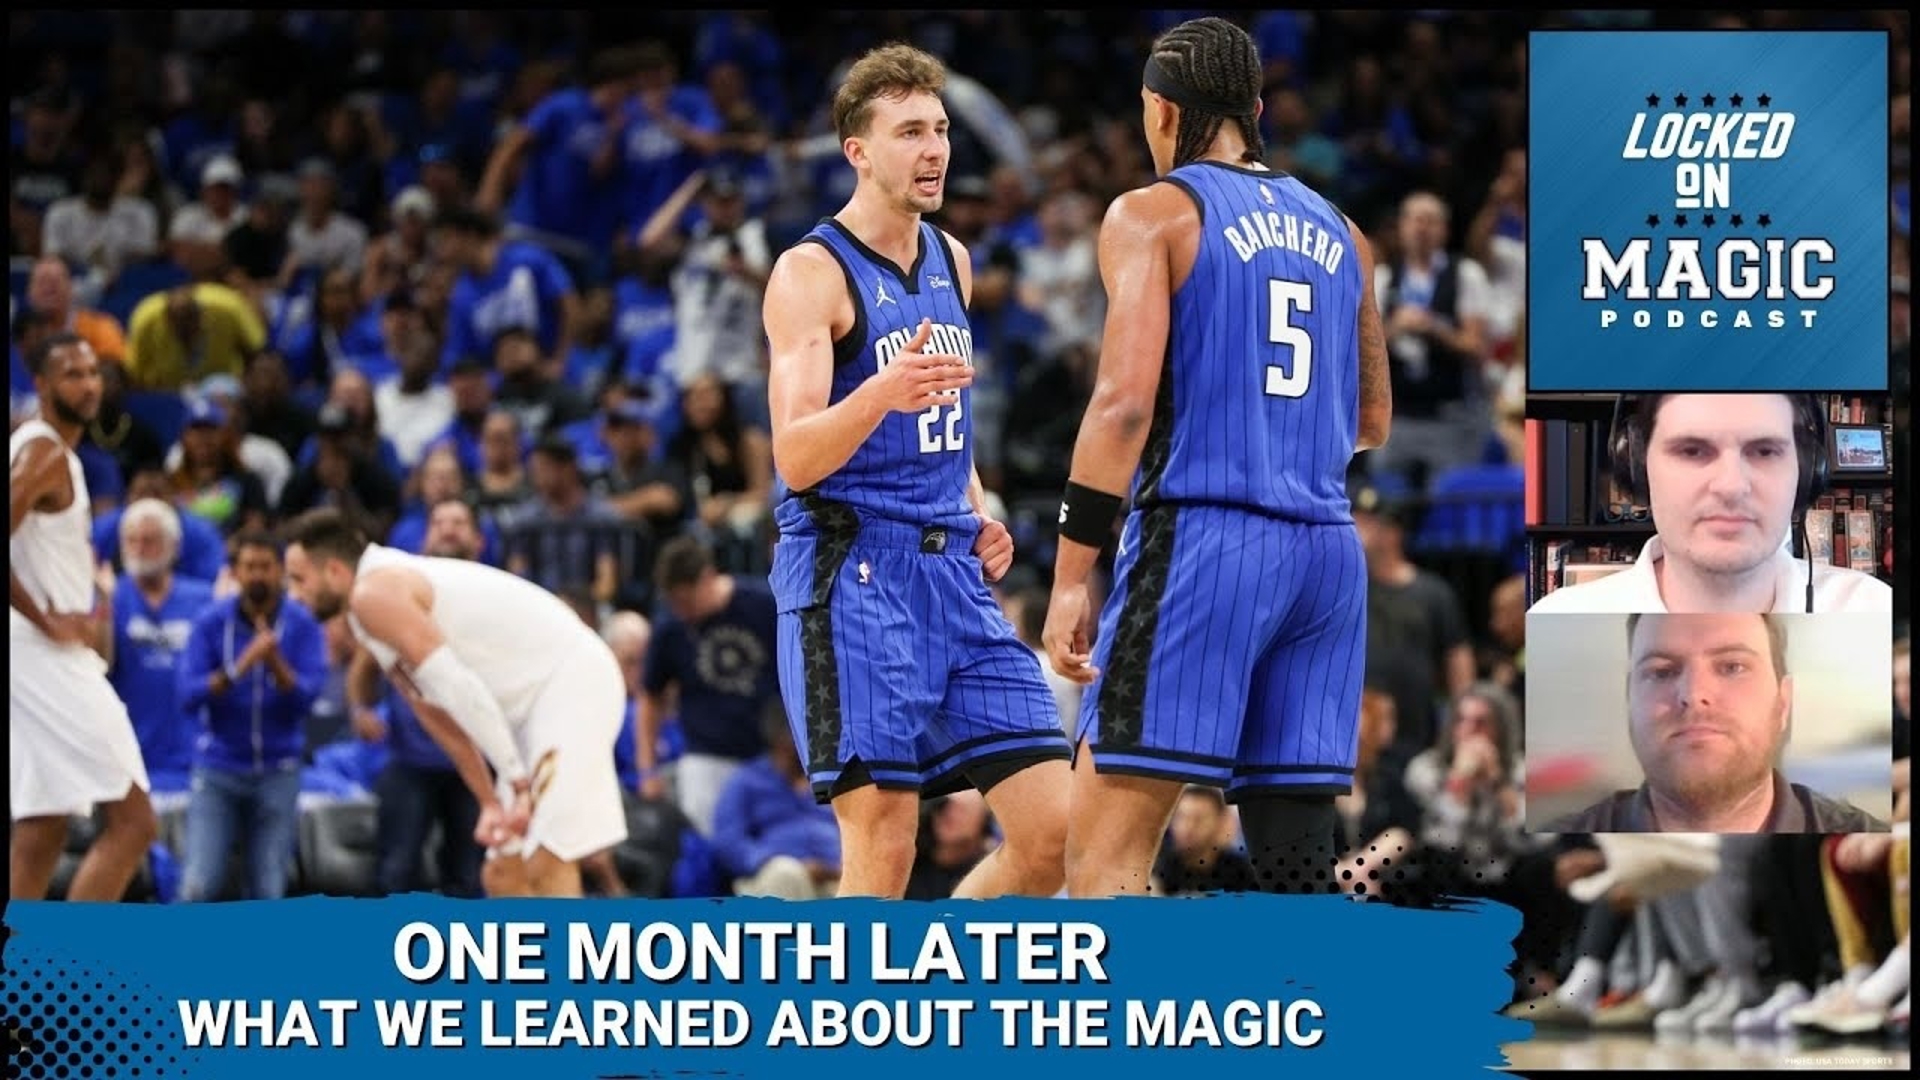 It has been one month since we last saw Orlando Magic basketball.